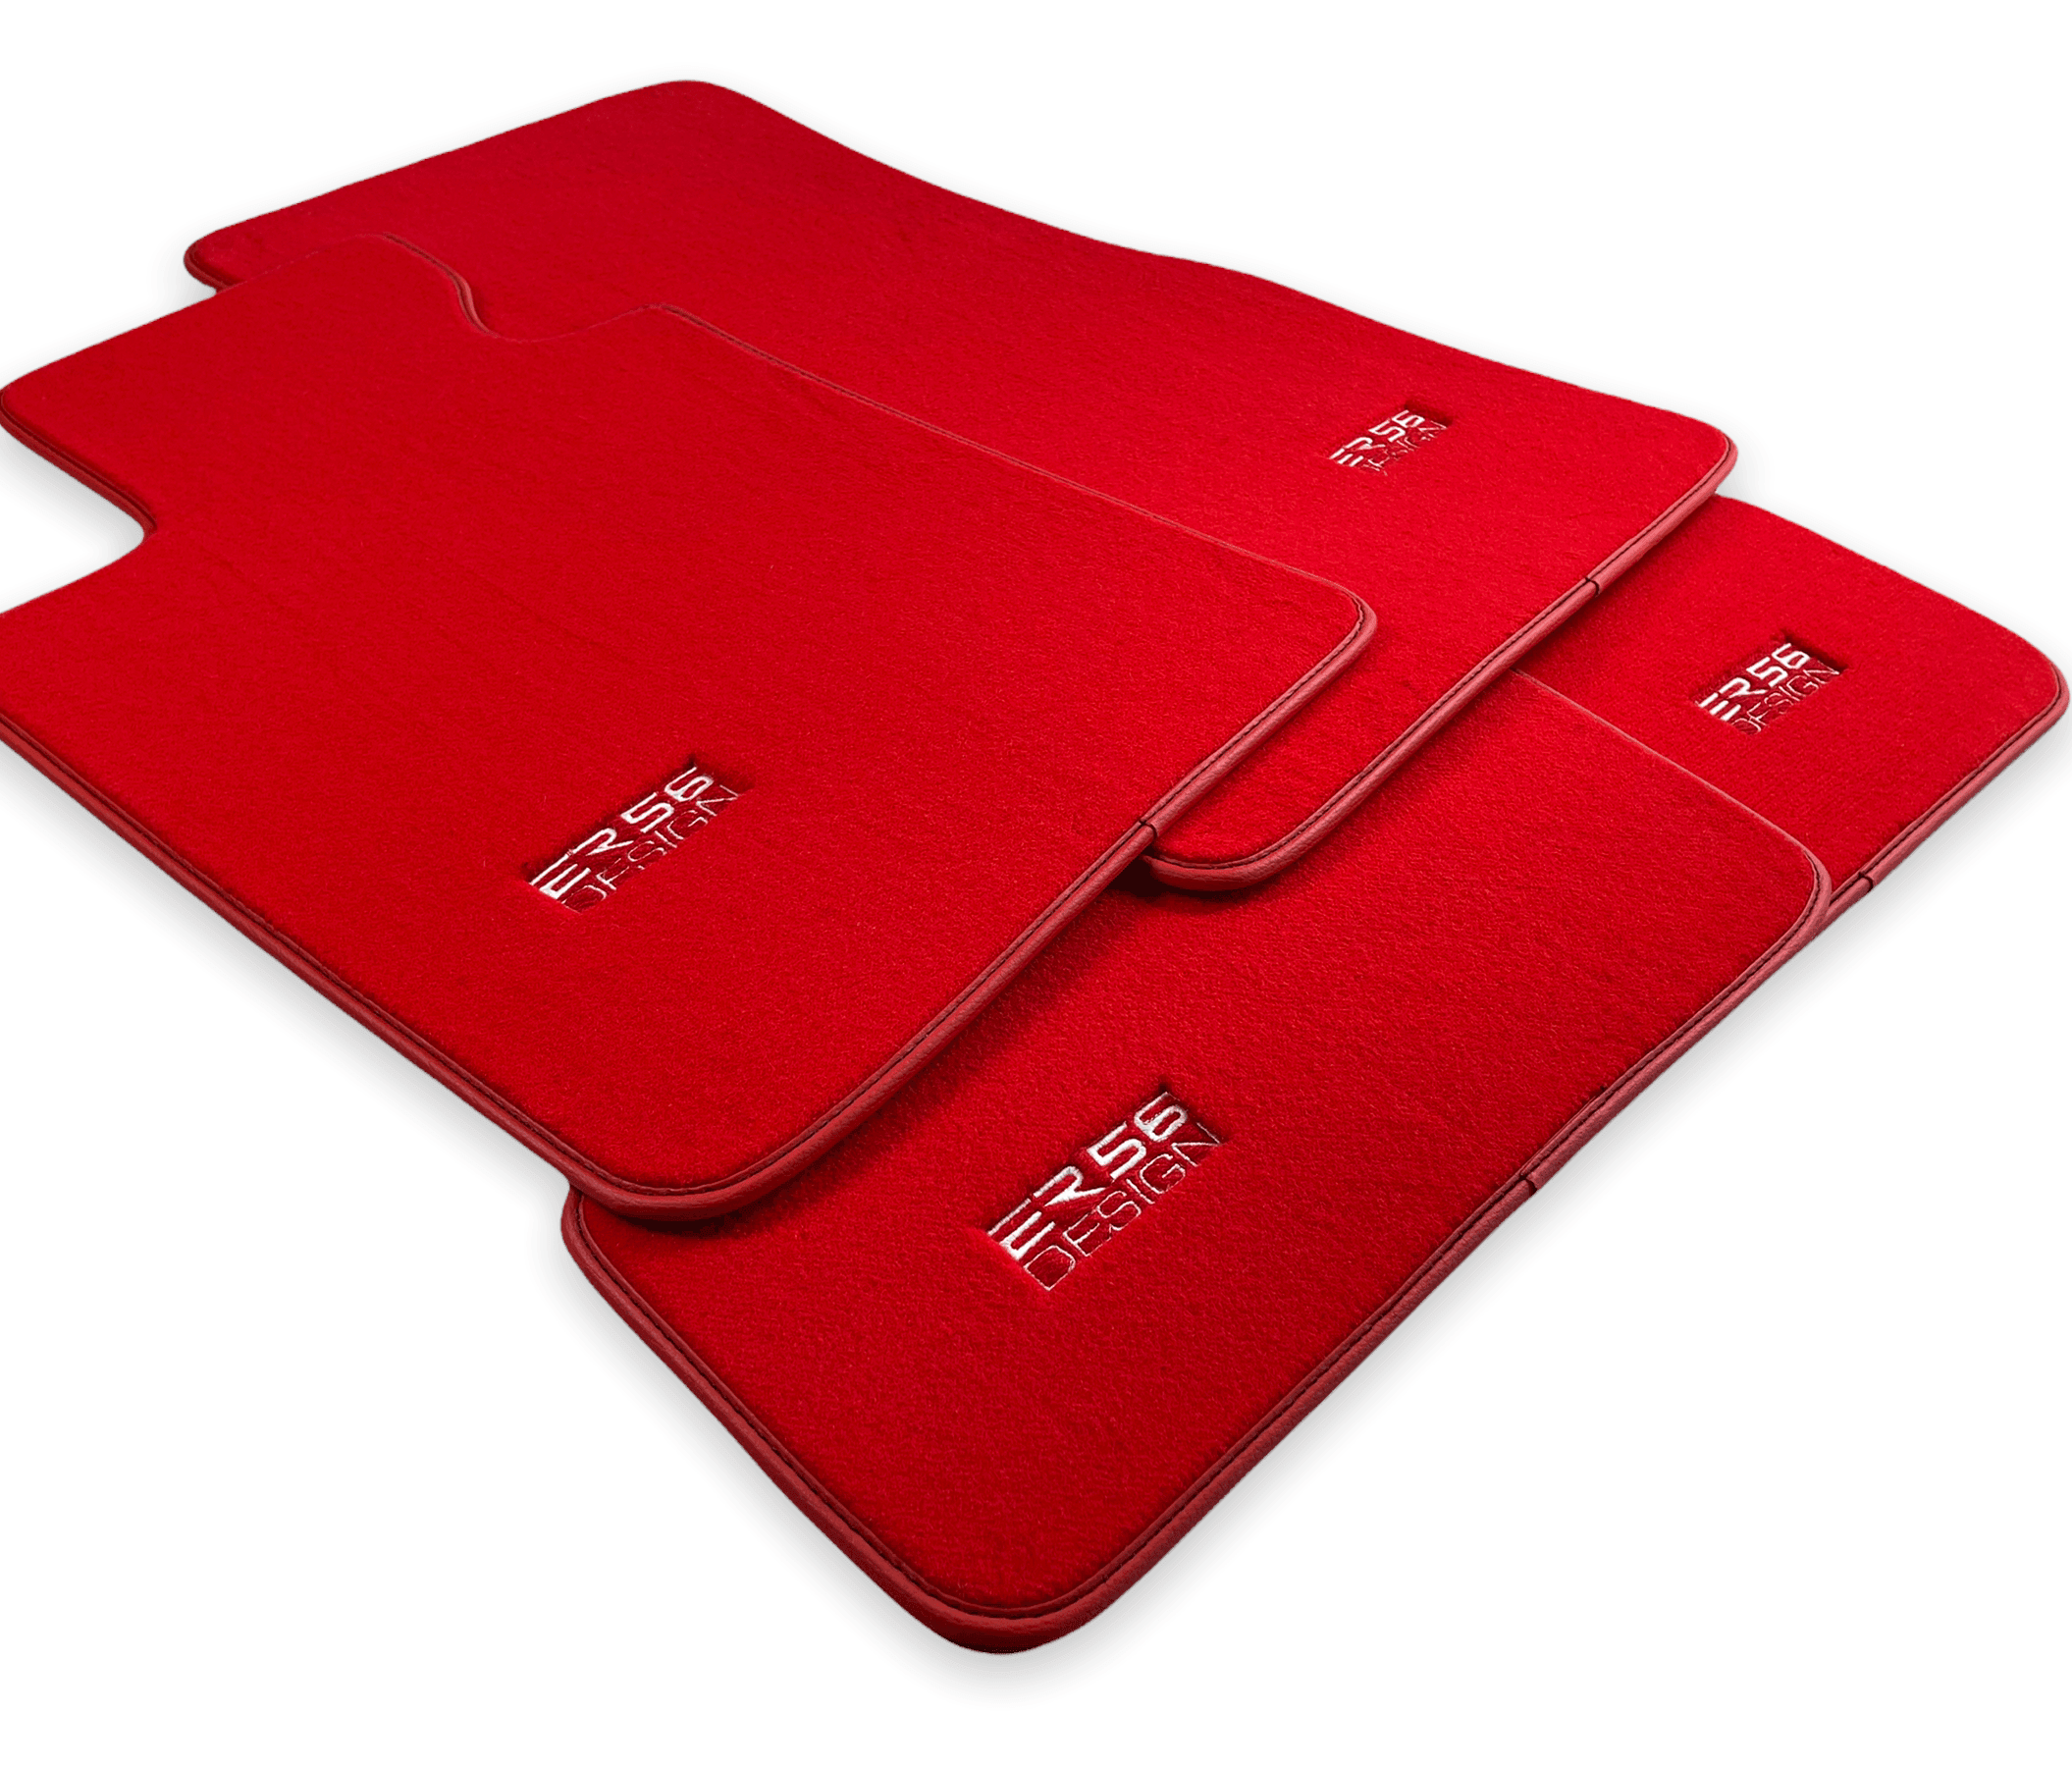 Red Mats For BMW 3 Series E36 2-door Coupe - ER56 Design Brand - AutoWin